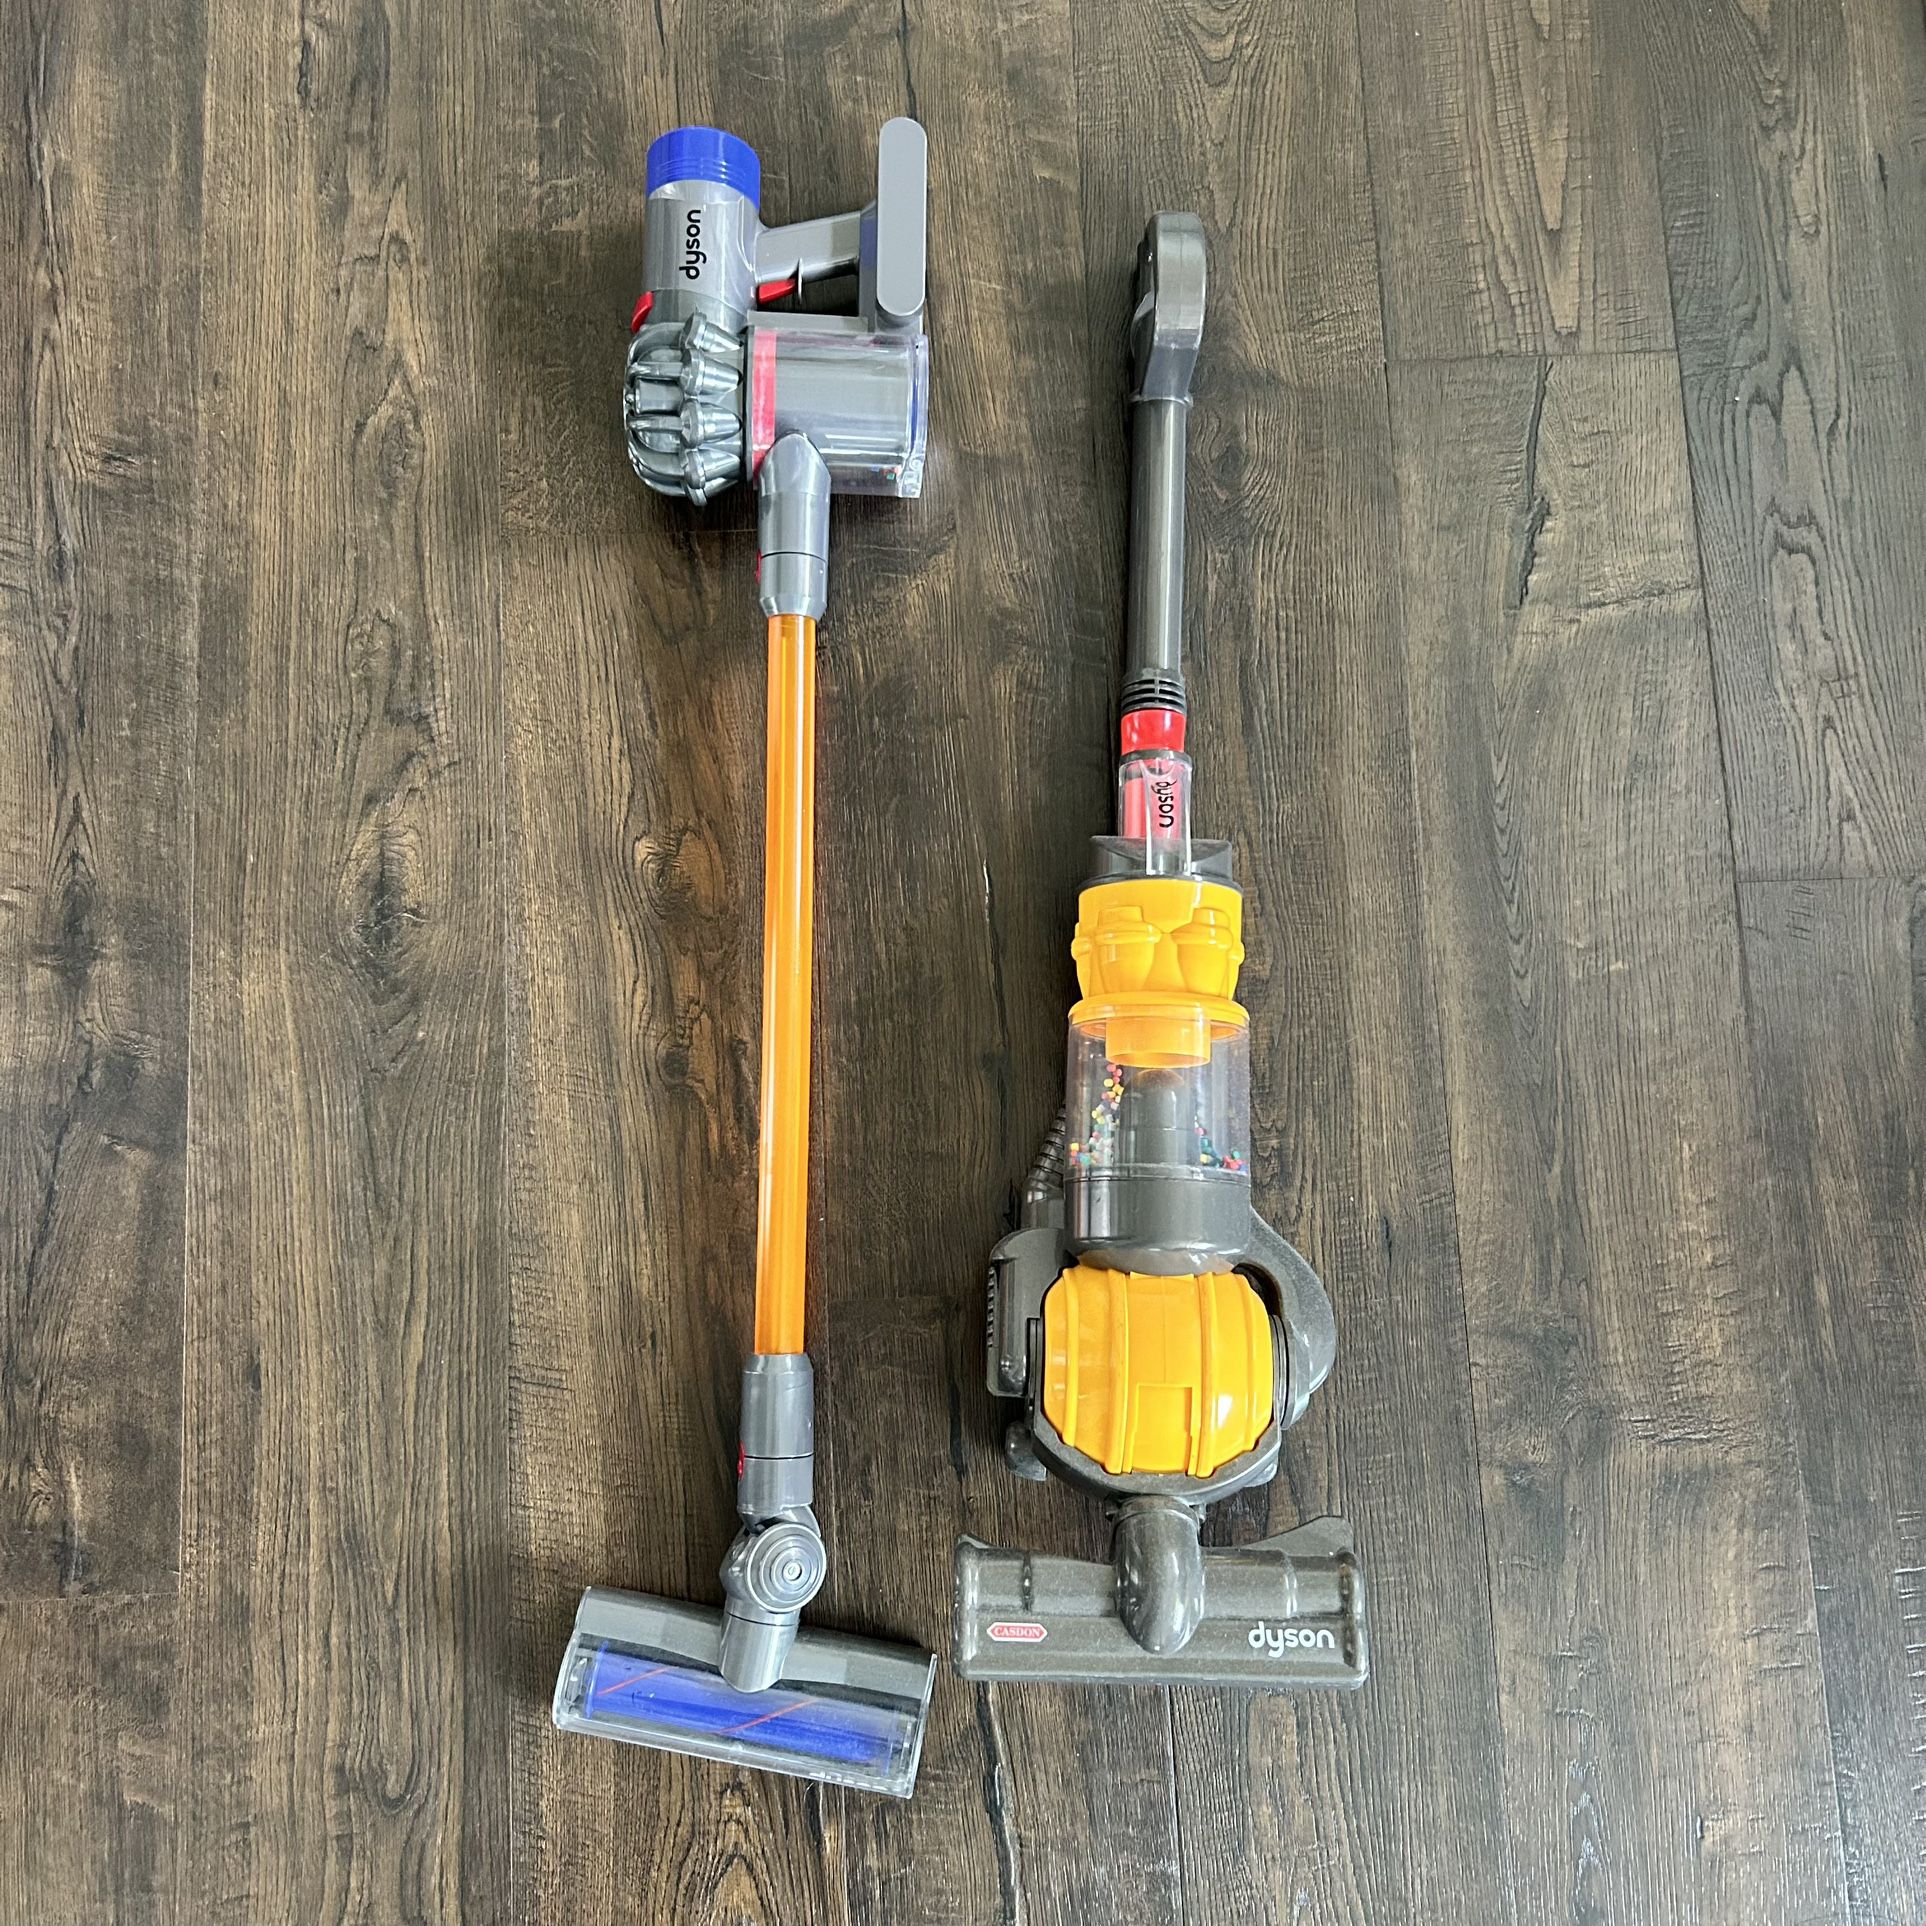 Dyson Vacuum For kids And Toddler Play